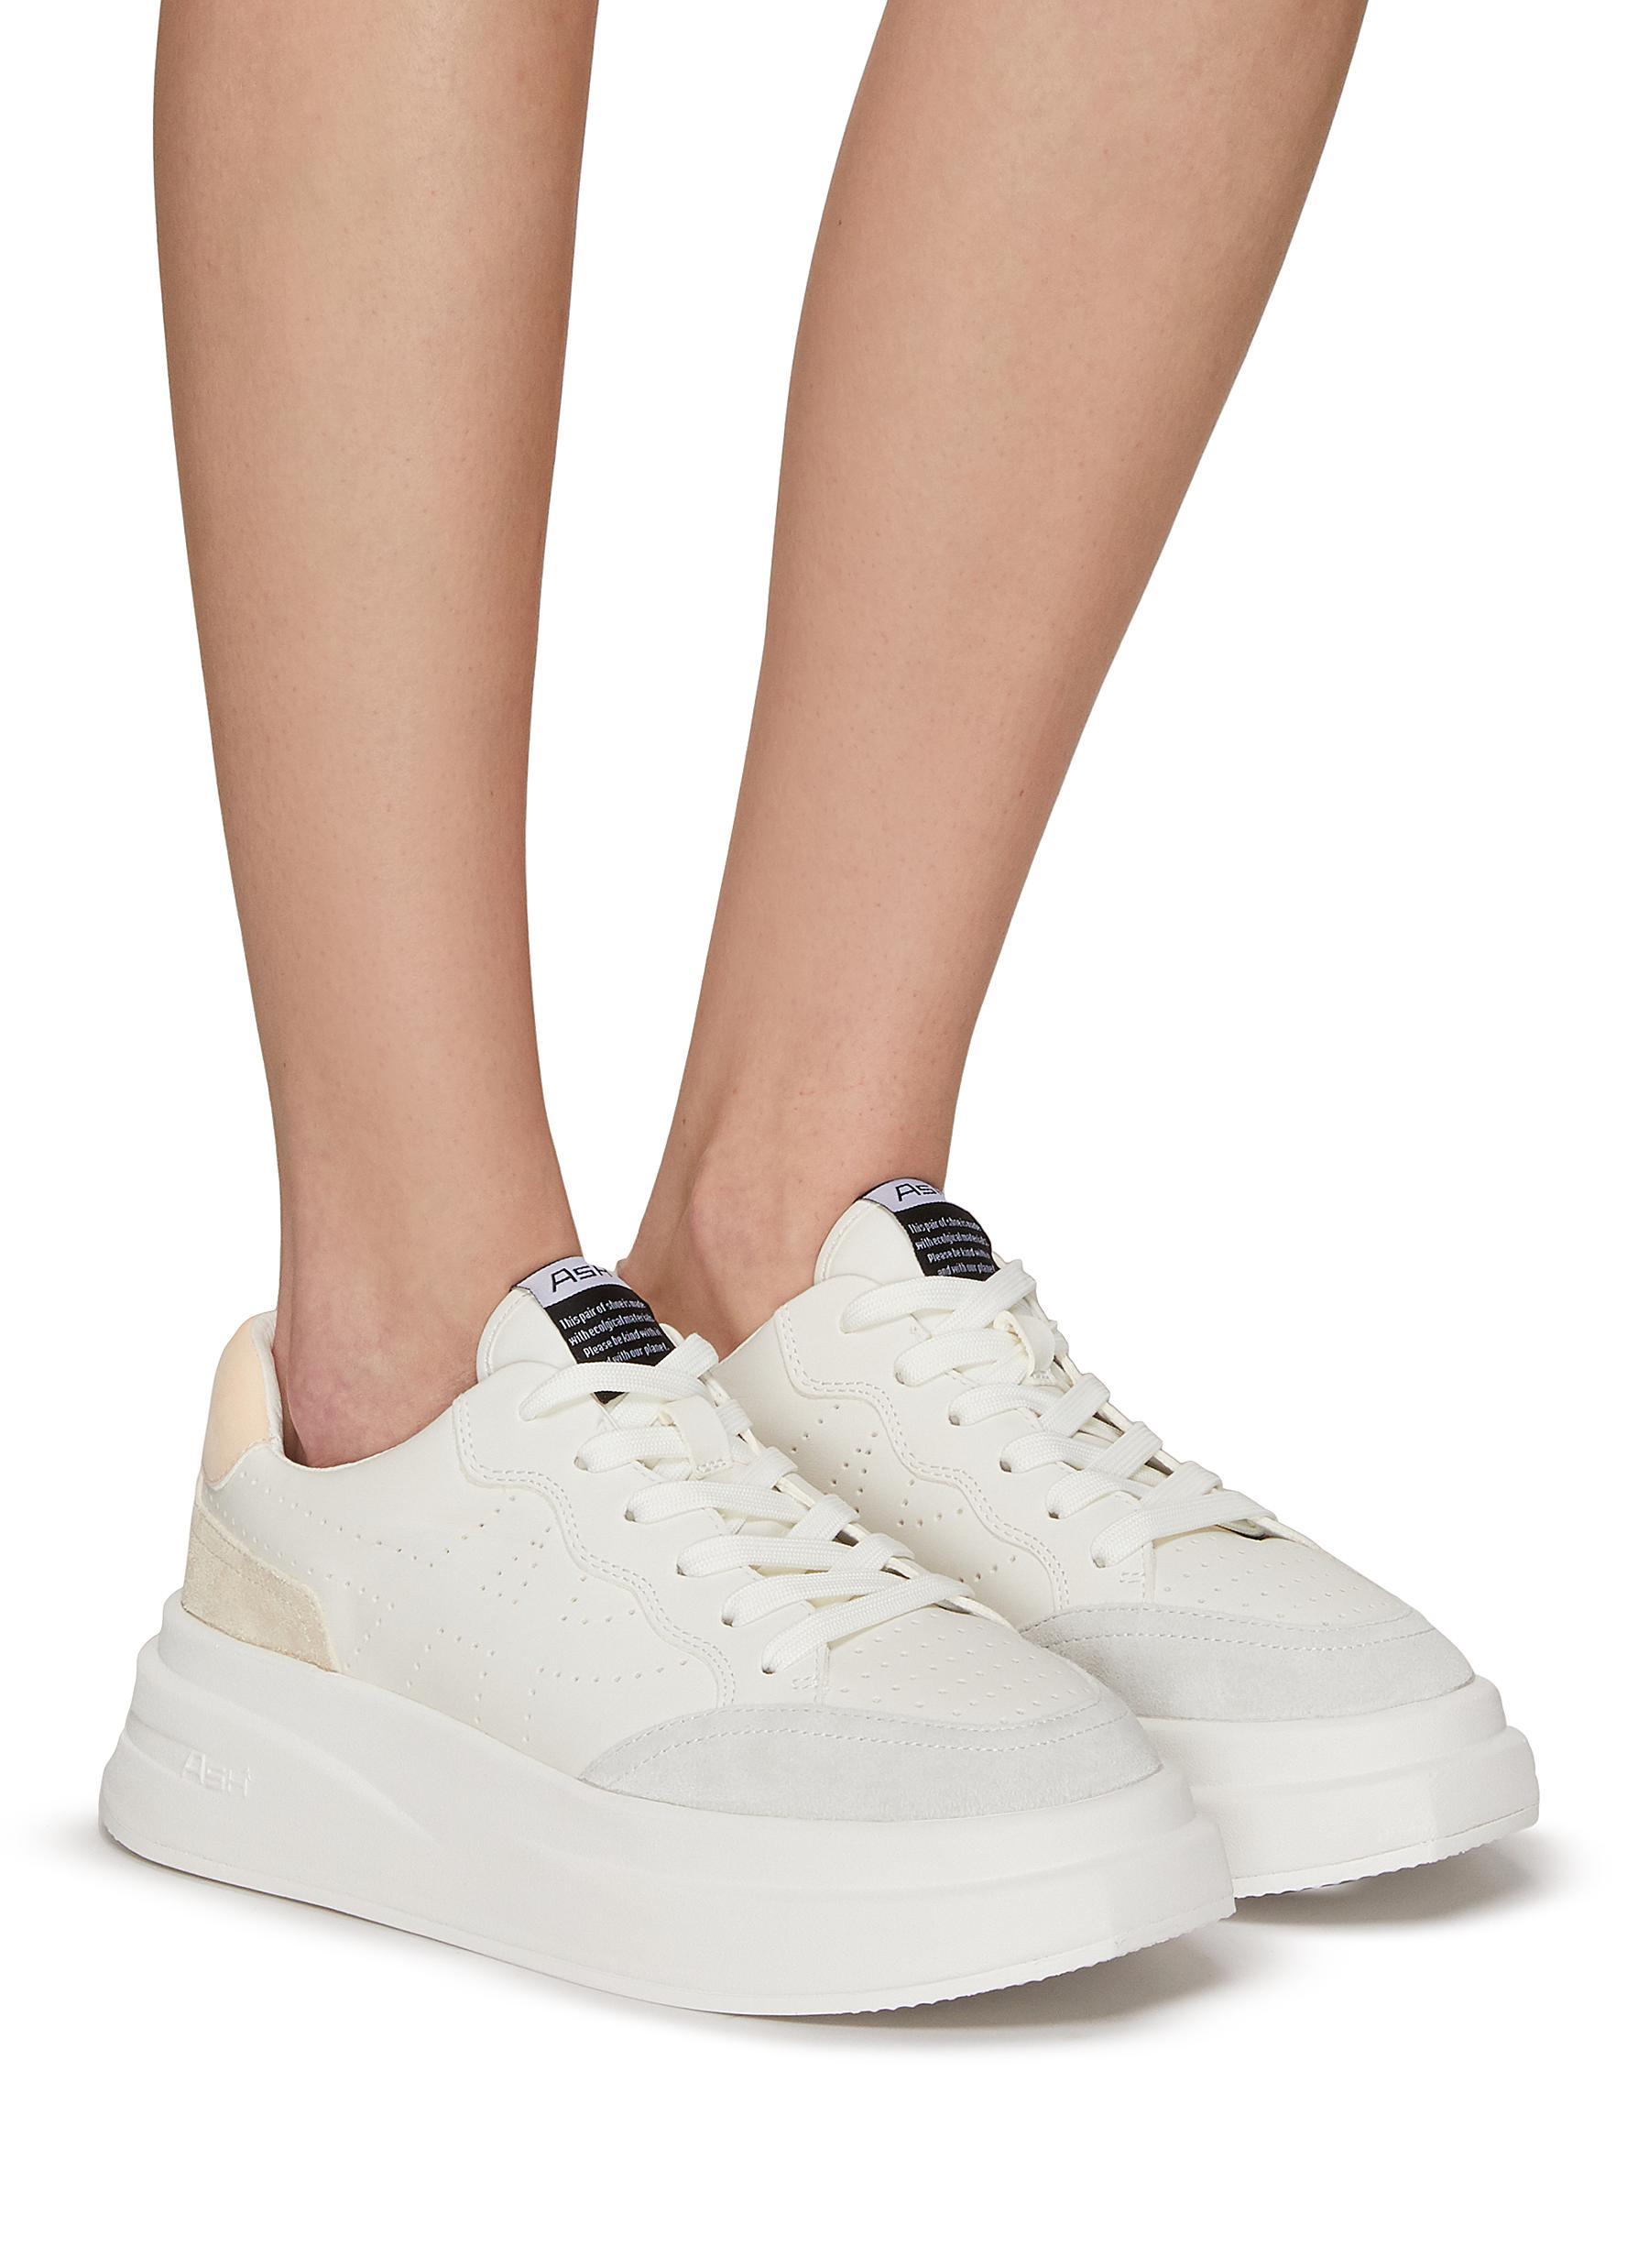 Ash 'impuls' Leather Platform Sneakers in White | Lyst